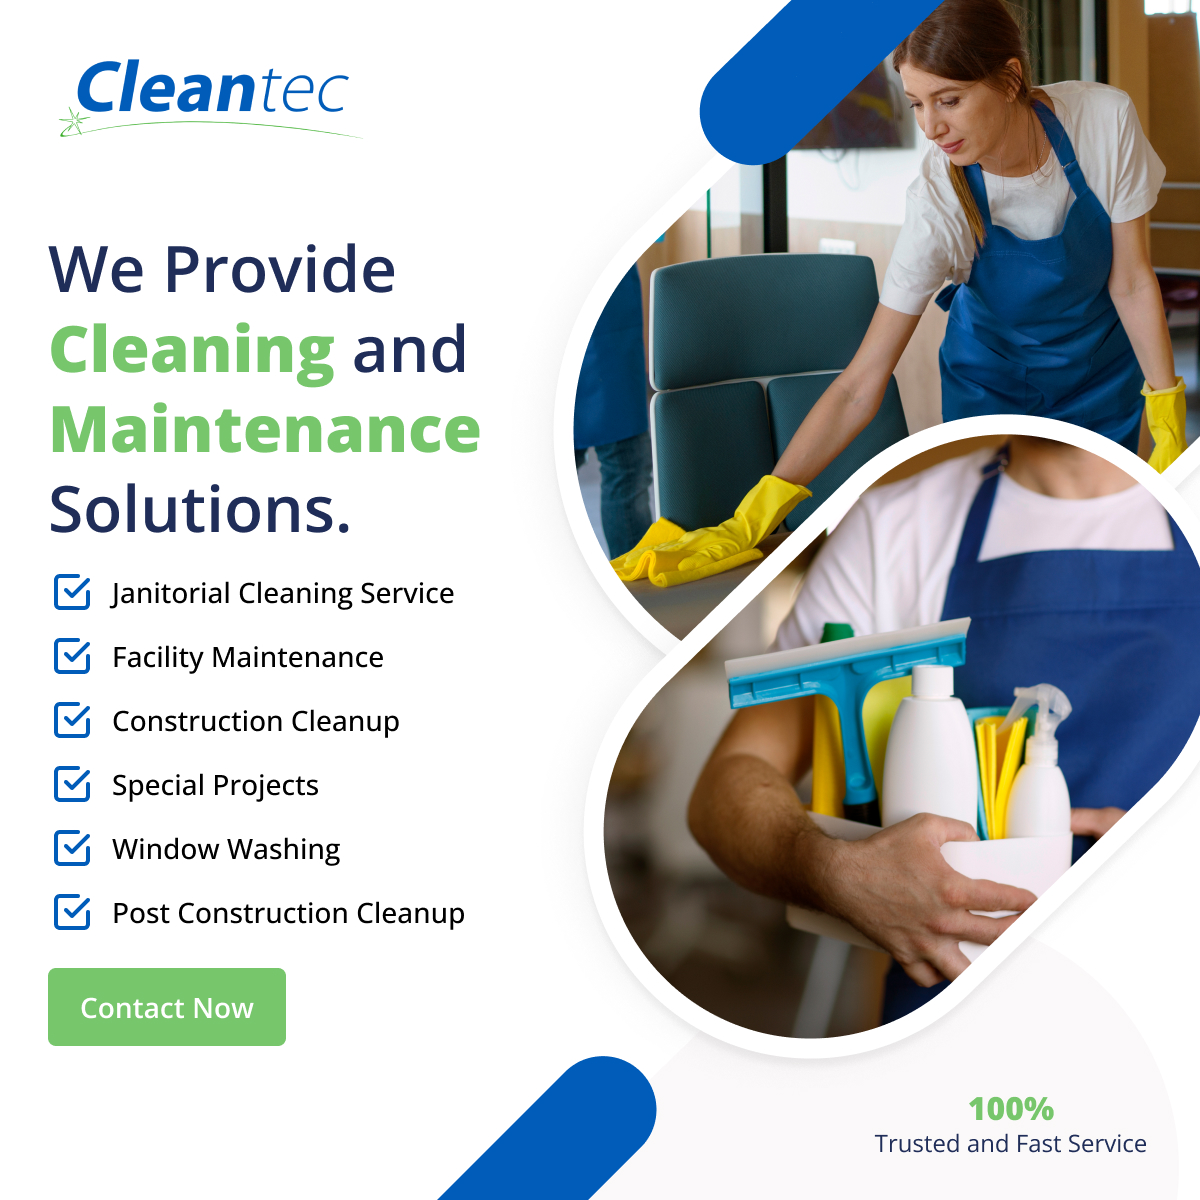 Cleantec - janitorial cleaning services